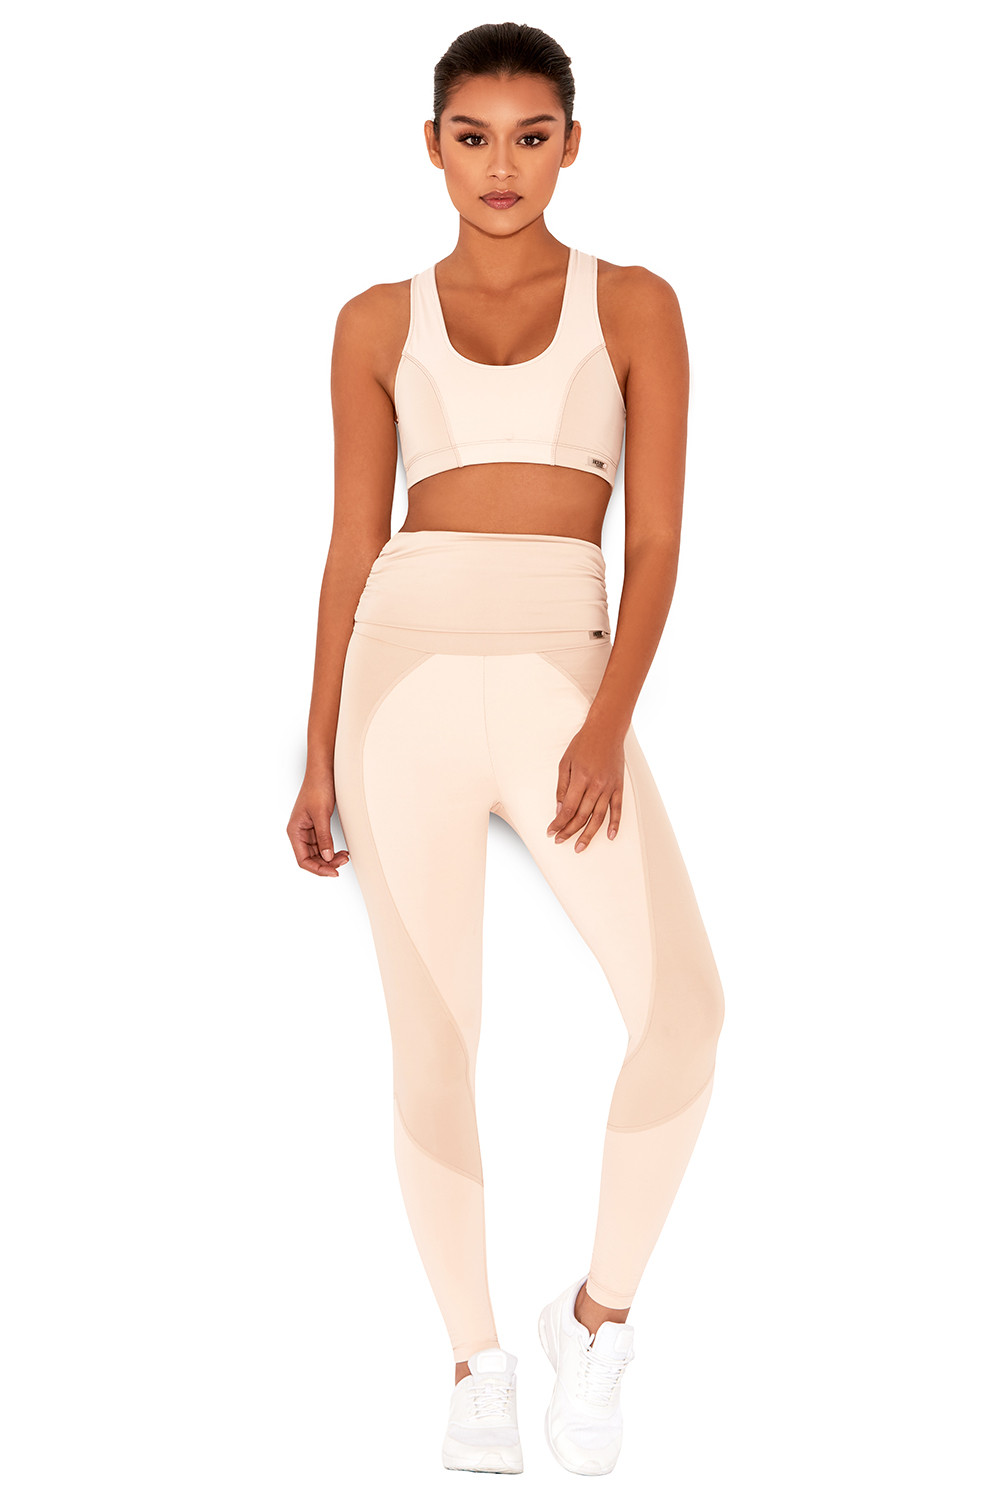 'Chill' Nude & Blush Workout Leggings with Fold Over Waistband